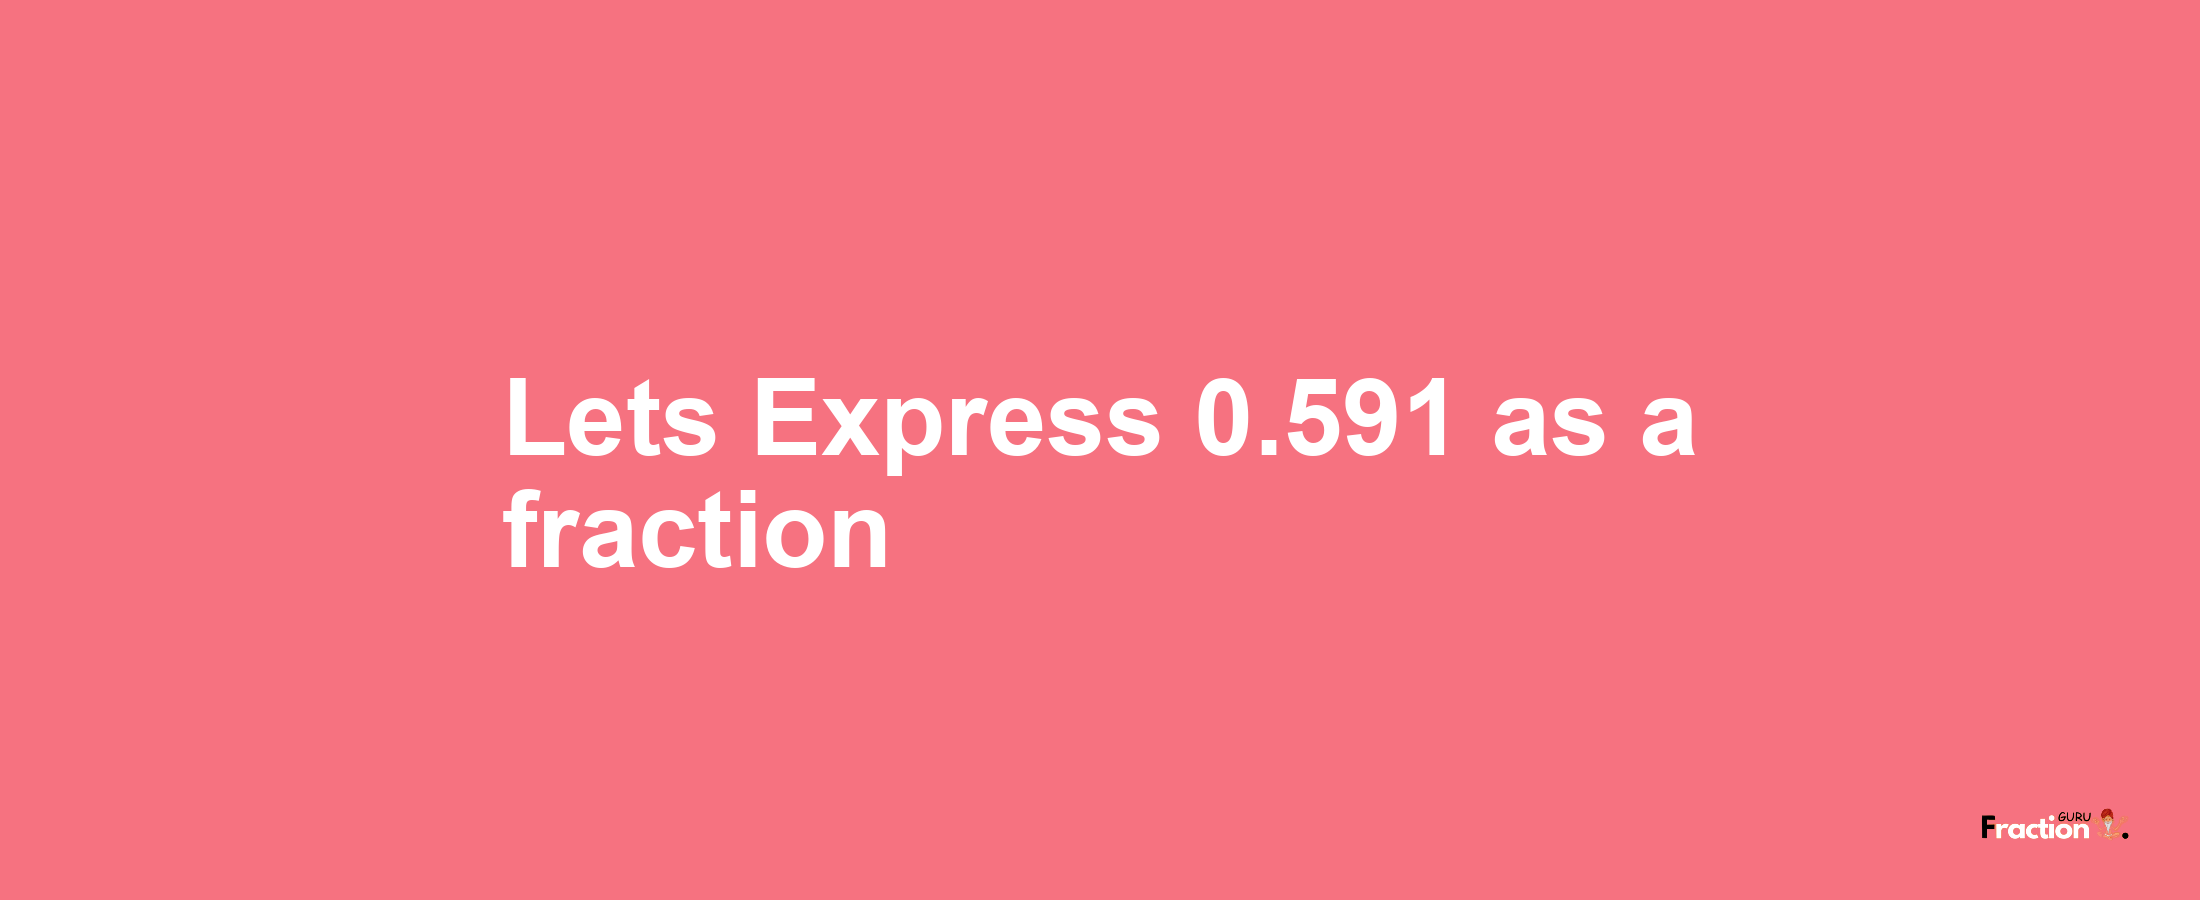 Lets Express 0.591 as afraction